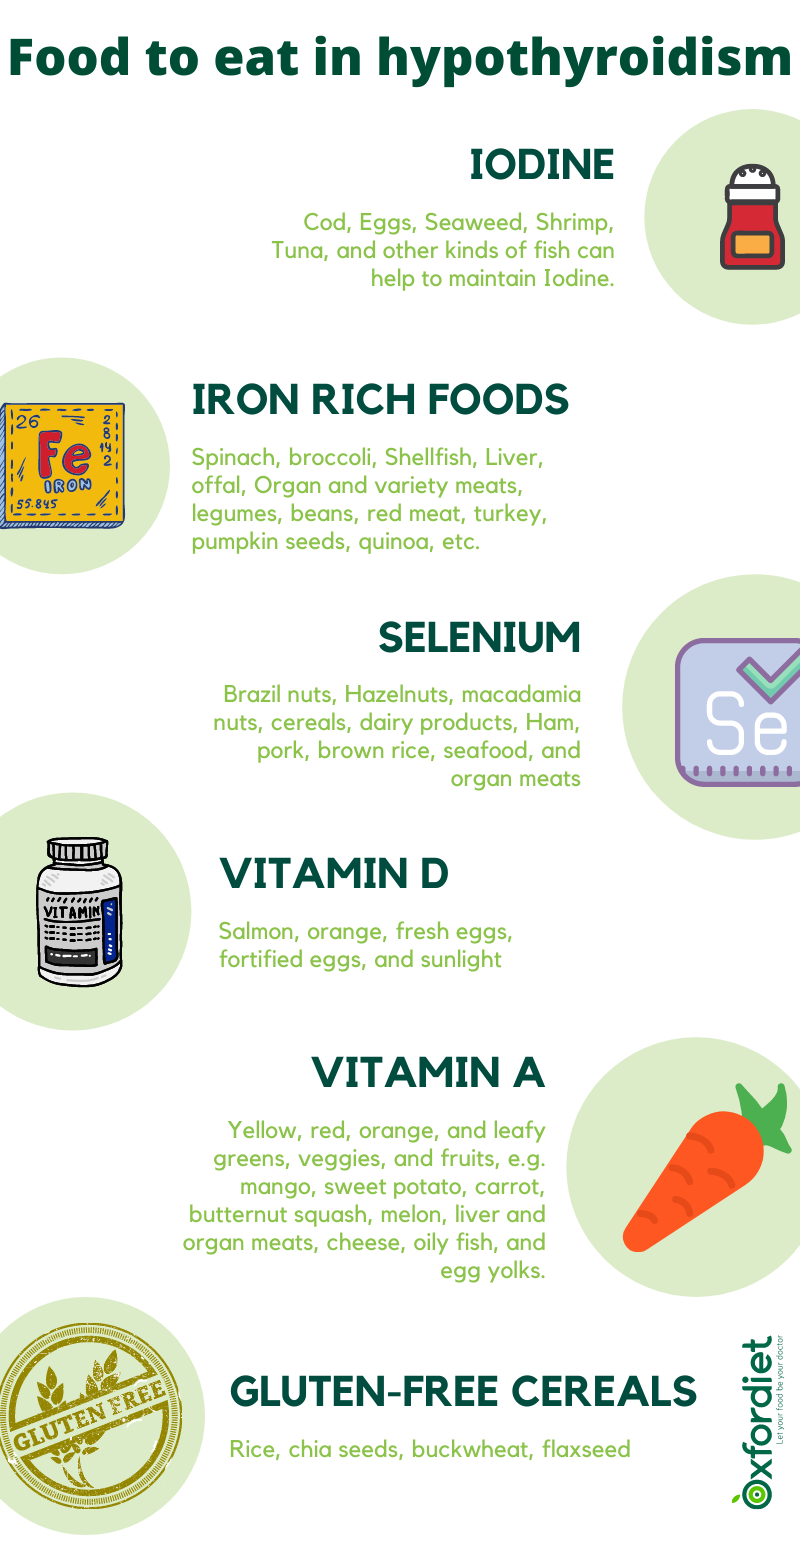 Foods to eat in hypothyroidism